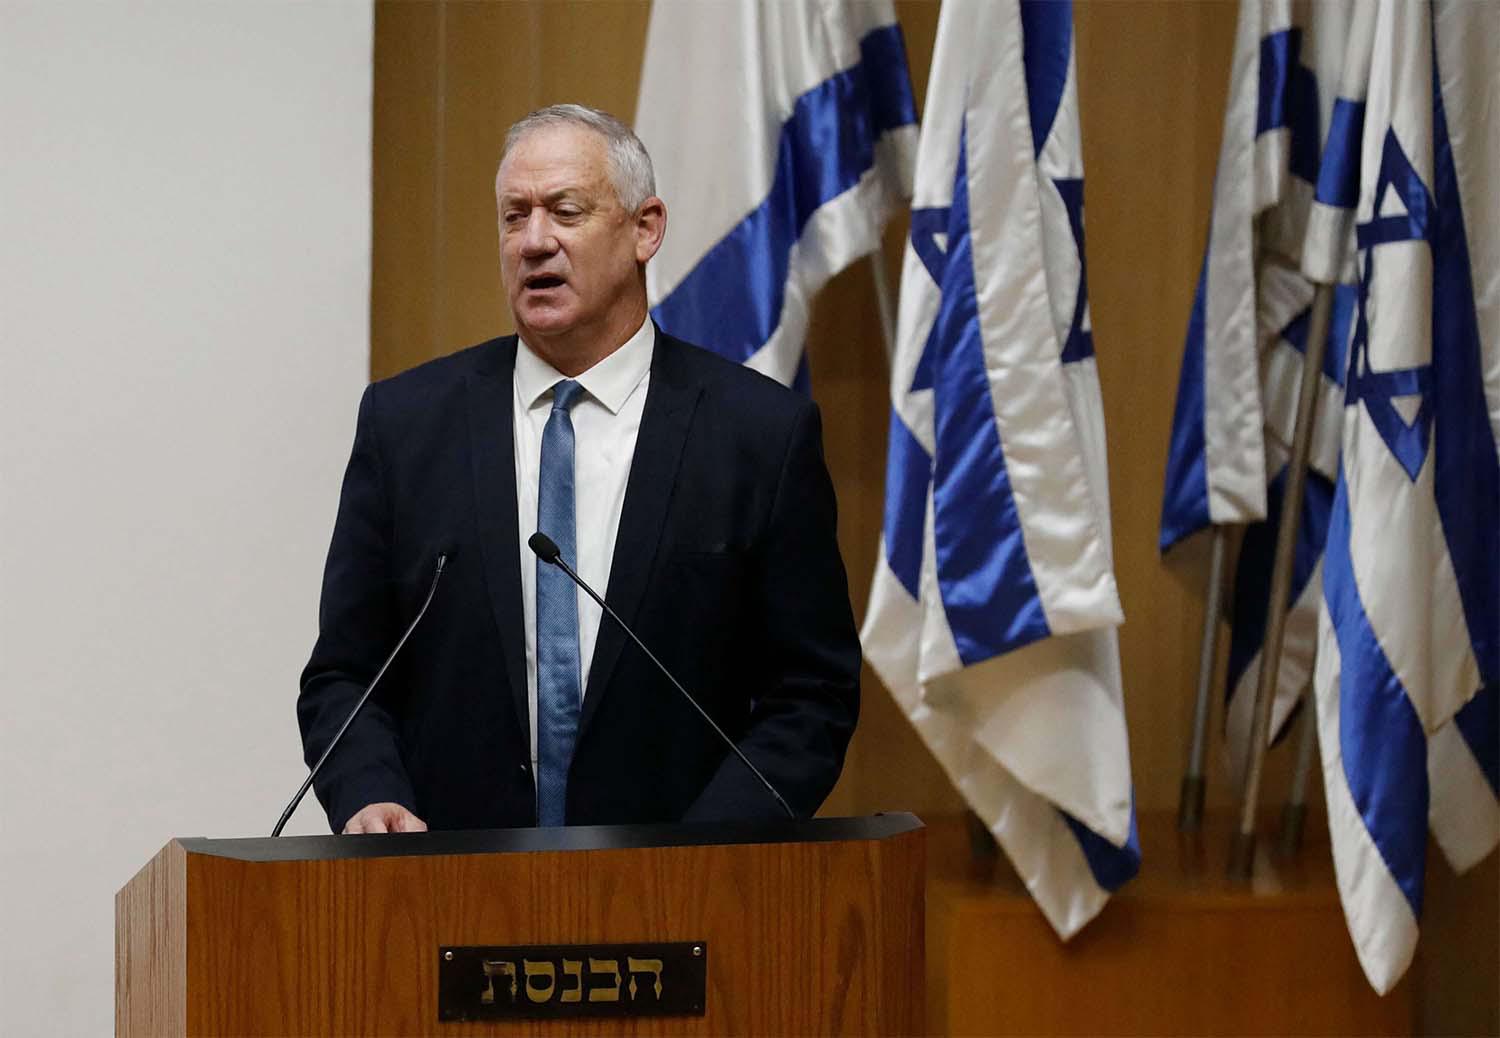 Gantz says the decision is part of his policy to strengthen the economy and improve the lives of Palestinians in the West Bank